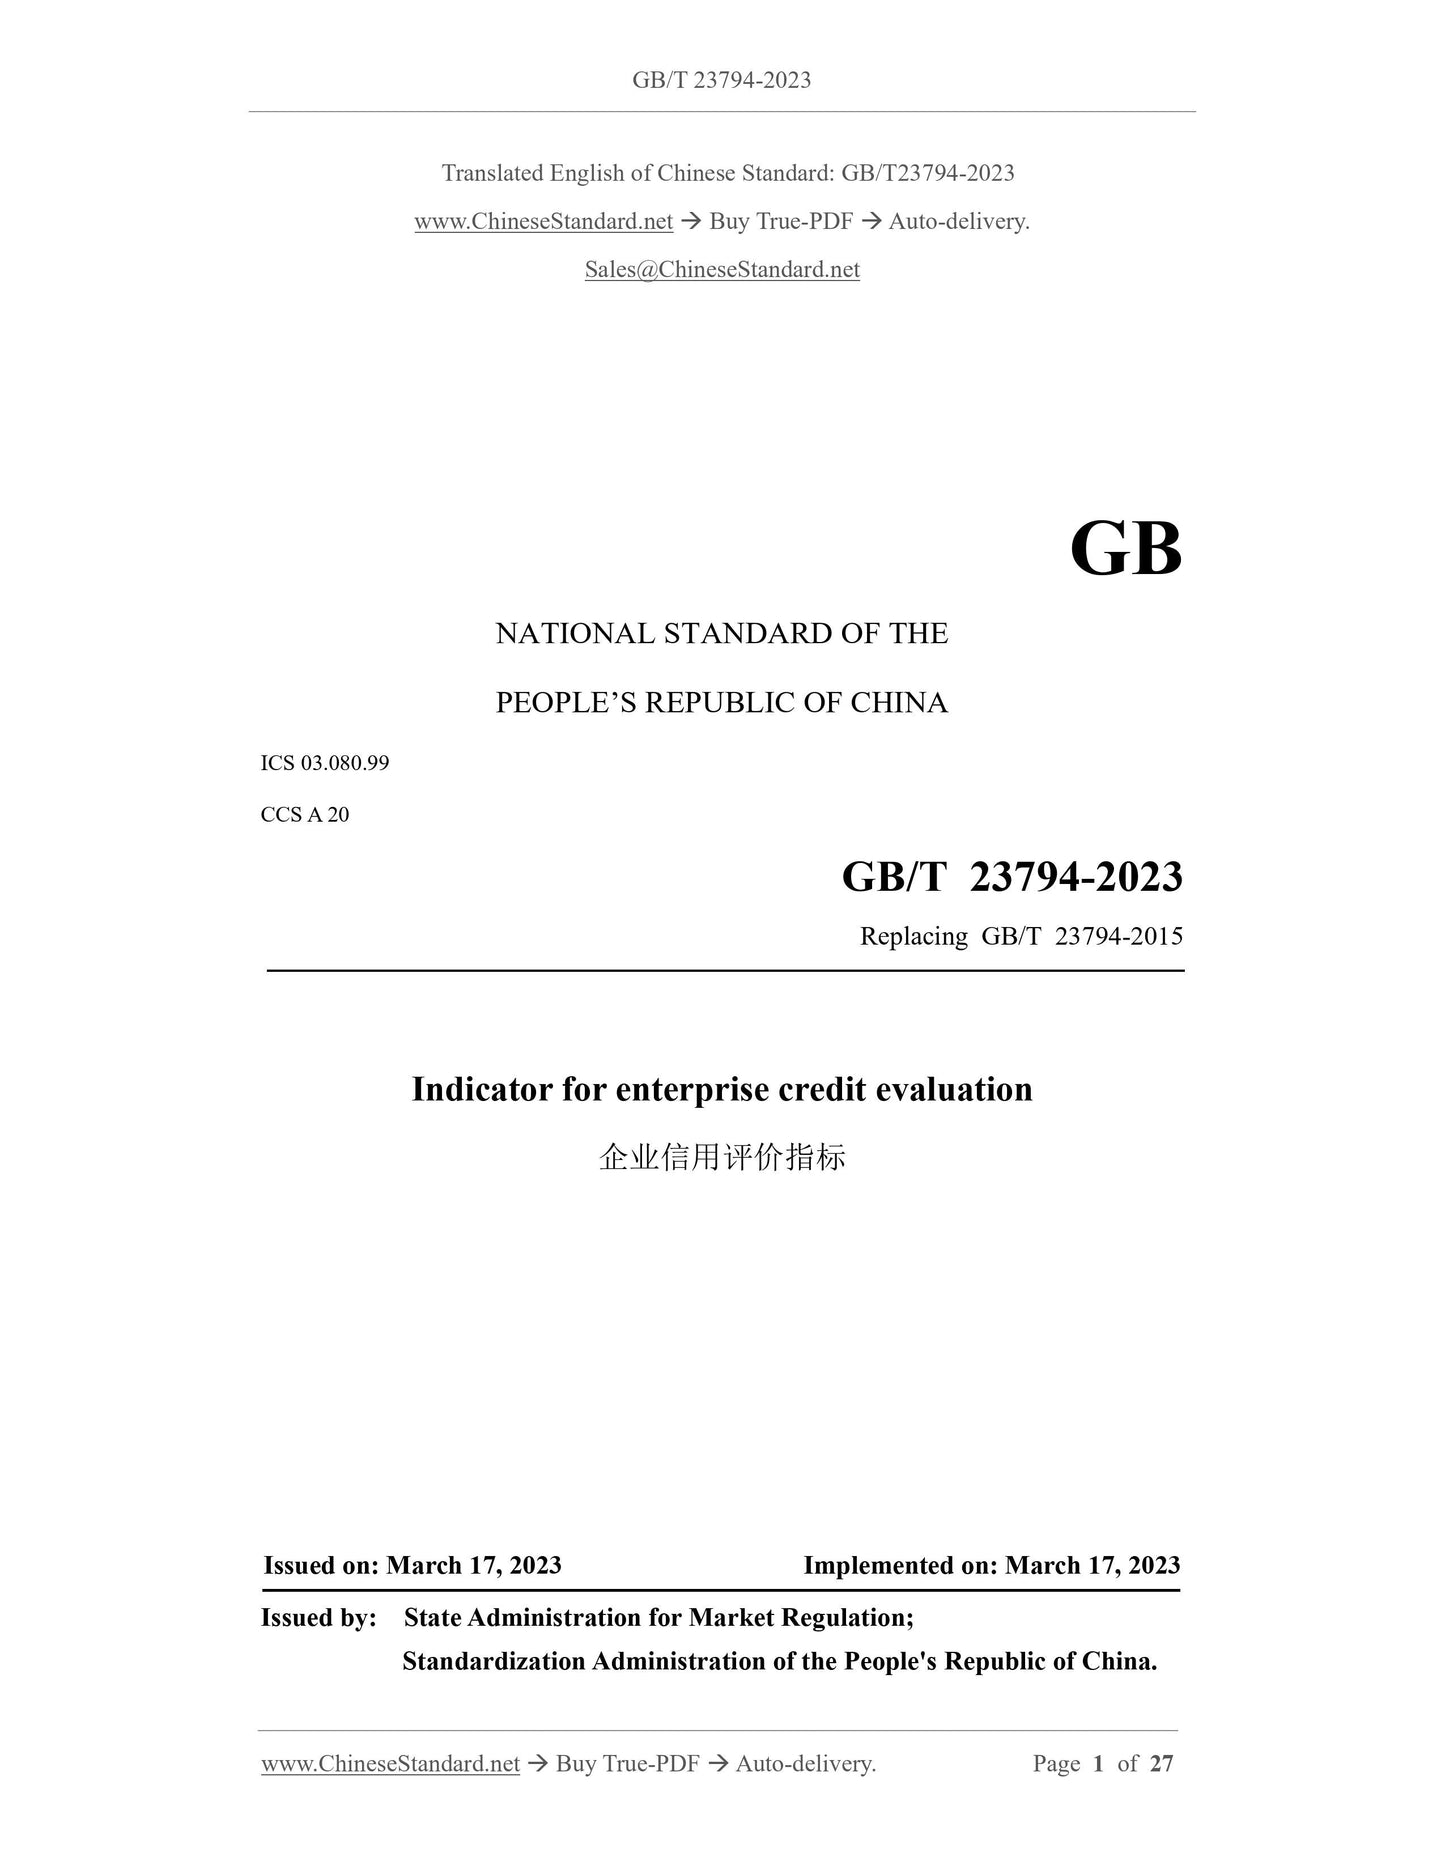 GB/T 23794-2023 Page 1